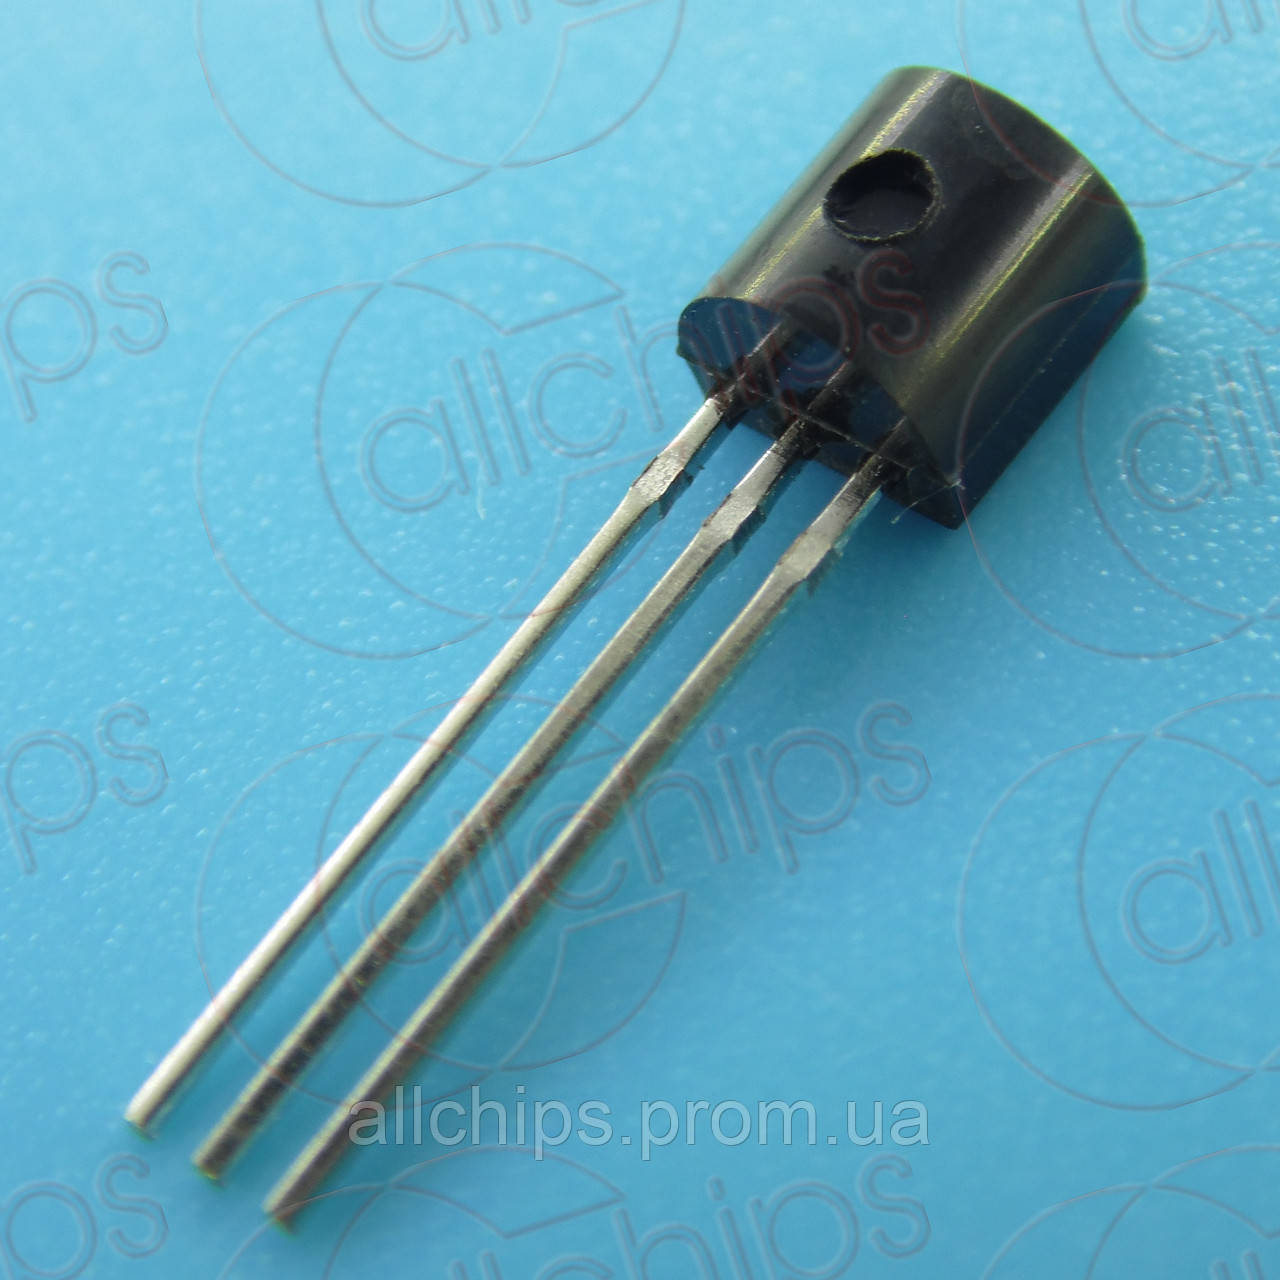 MOSFET N-канала 50В 10мА Toshiba 2SK246 TO92 - фото 4 - id-p1388499017